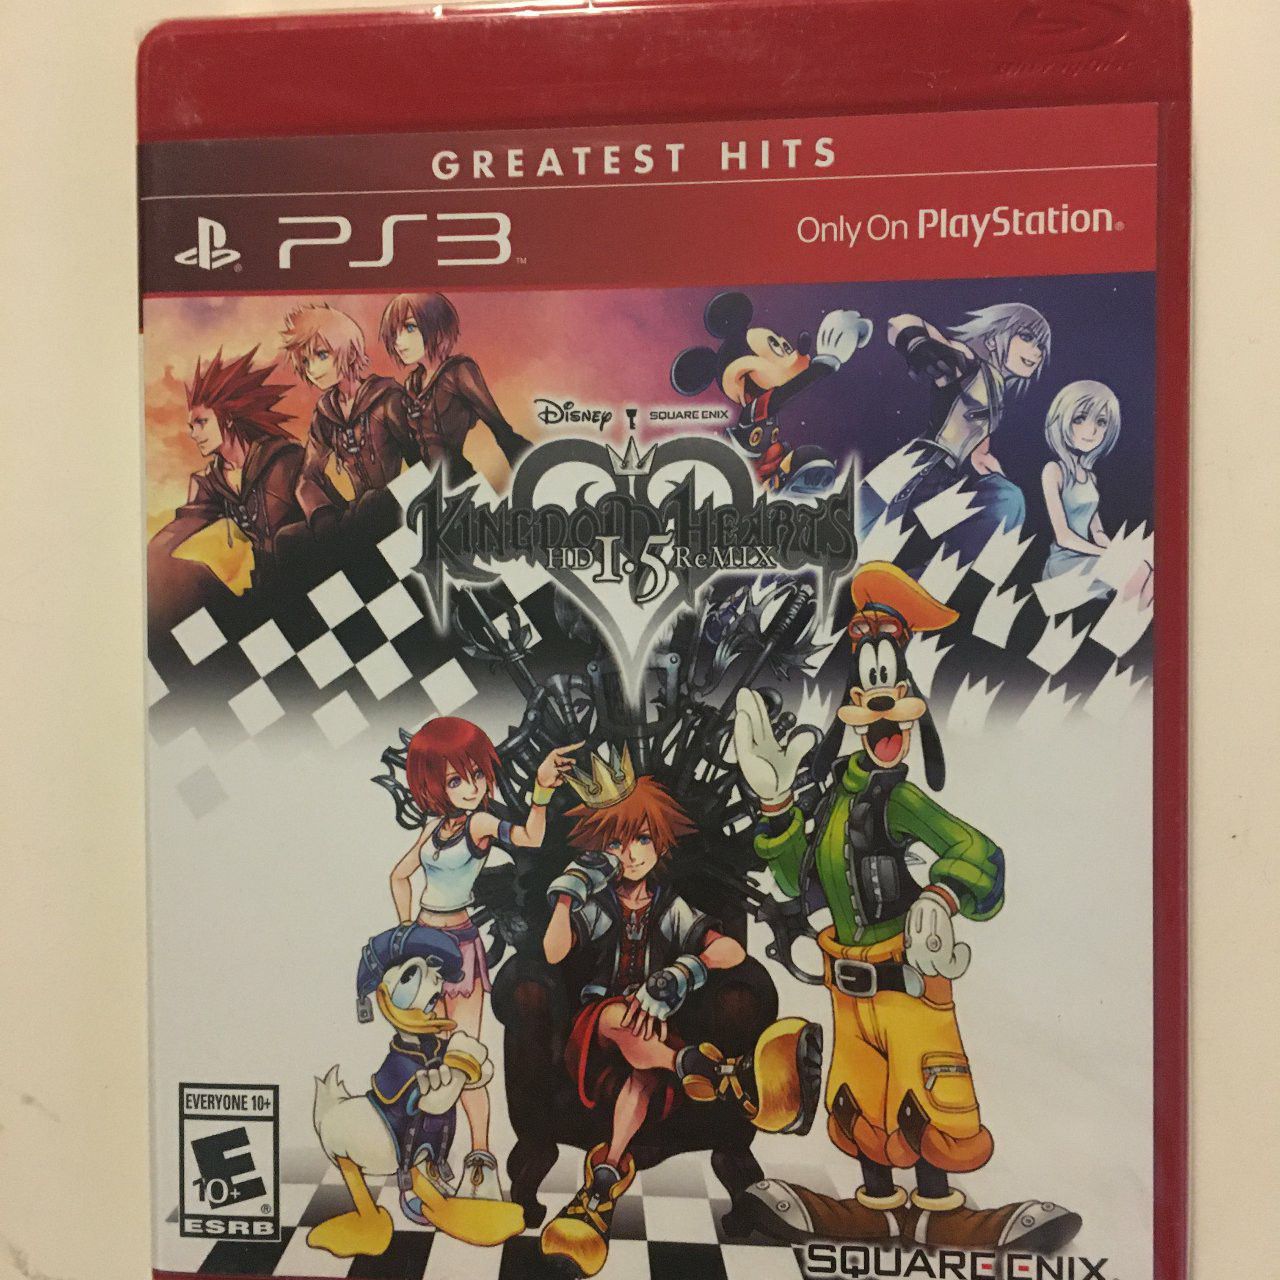 New Sealed Kingdom Hearts 1.5 HD Remix Playstation 3 PS3 Video Game